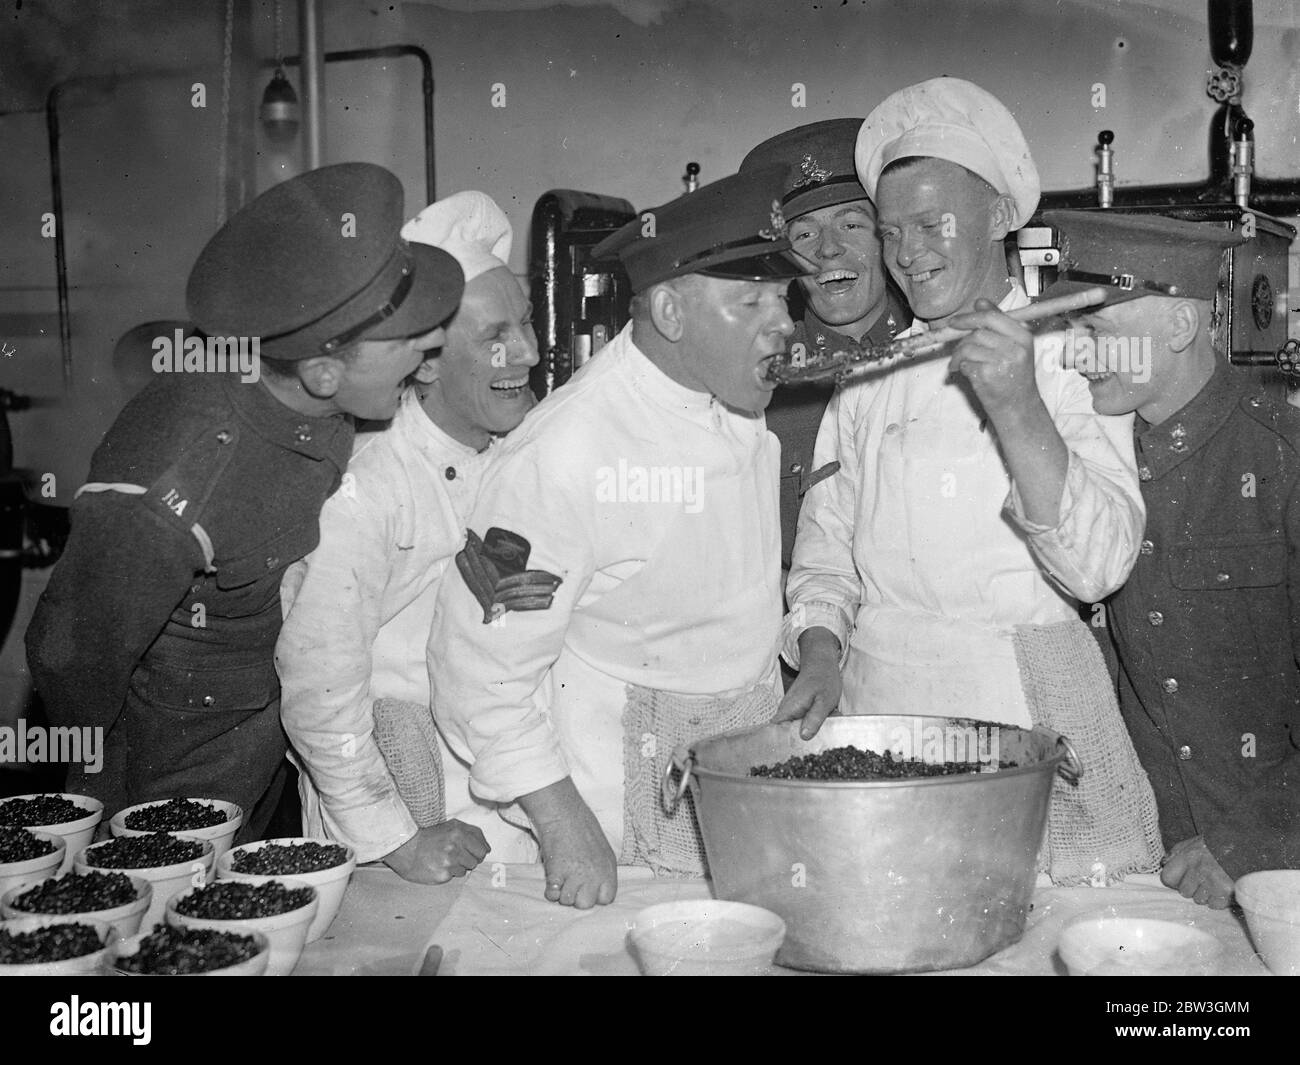 Woolwich barracks troops are making their own christmas pudding . For the first time men of the Royal Artillery at Woolwich Barracks are making their own Christmas puddings instead of buying them from outside . Six hundred men have to be catered for in the messroom and the work of preparing and mixing the puddings has already commenced . Liberal quantities of brand and stout are the most popular ingredients . Photo shows , the Sergeant cook has first taste in the kitchens at Woolwich barracks . 7 December 1935 Stock Photo